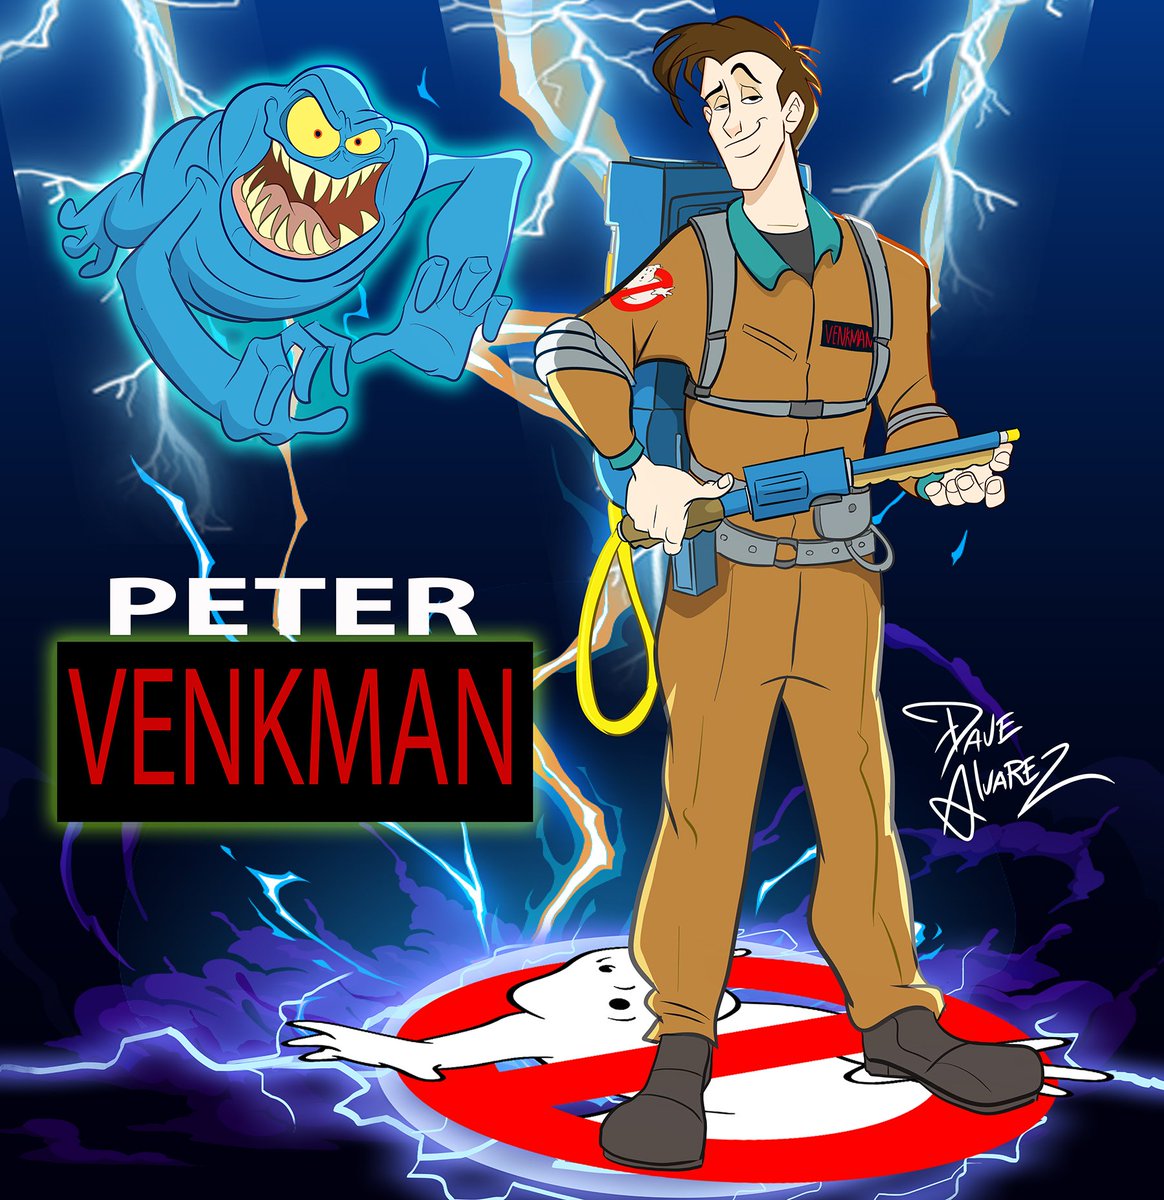 More non-AI art. This time, the animated Peter Venkman and the Grabber Ghost by yours truly. #ghostbusters #realghostbusters #slimer #petervenkman #ghostcorps #animation #characterdesign #DaveAlvarez